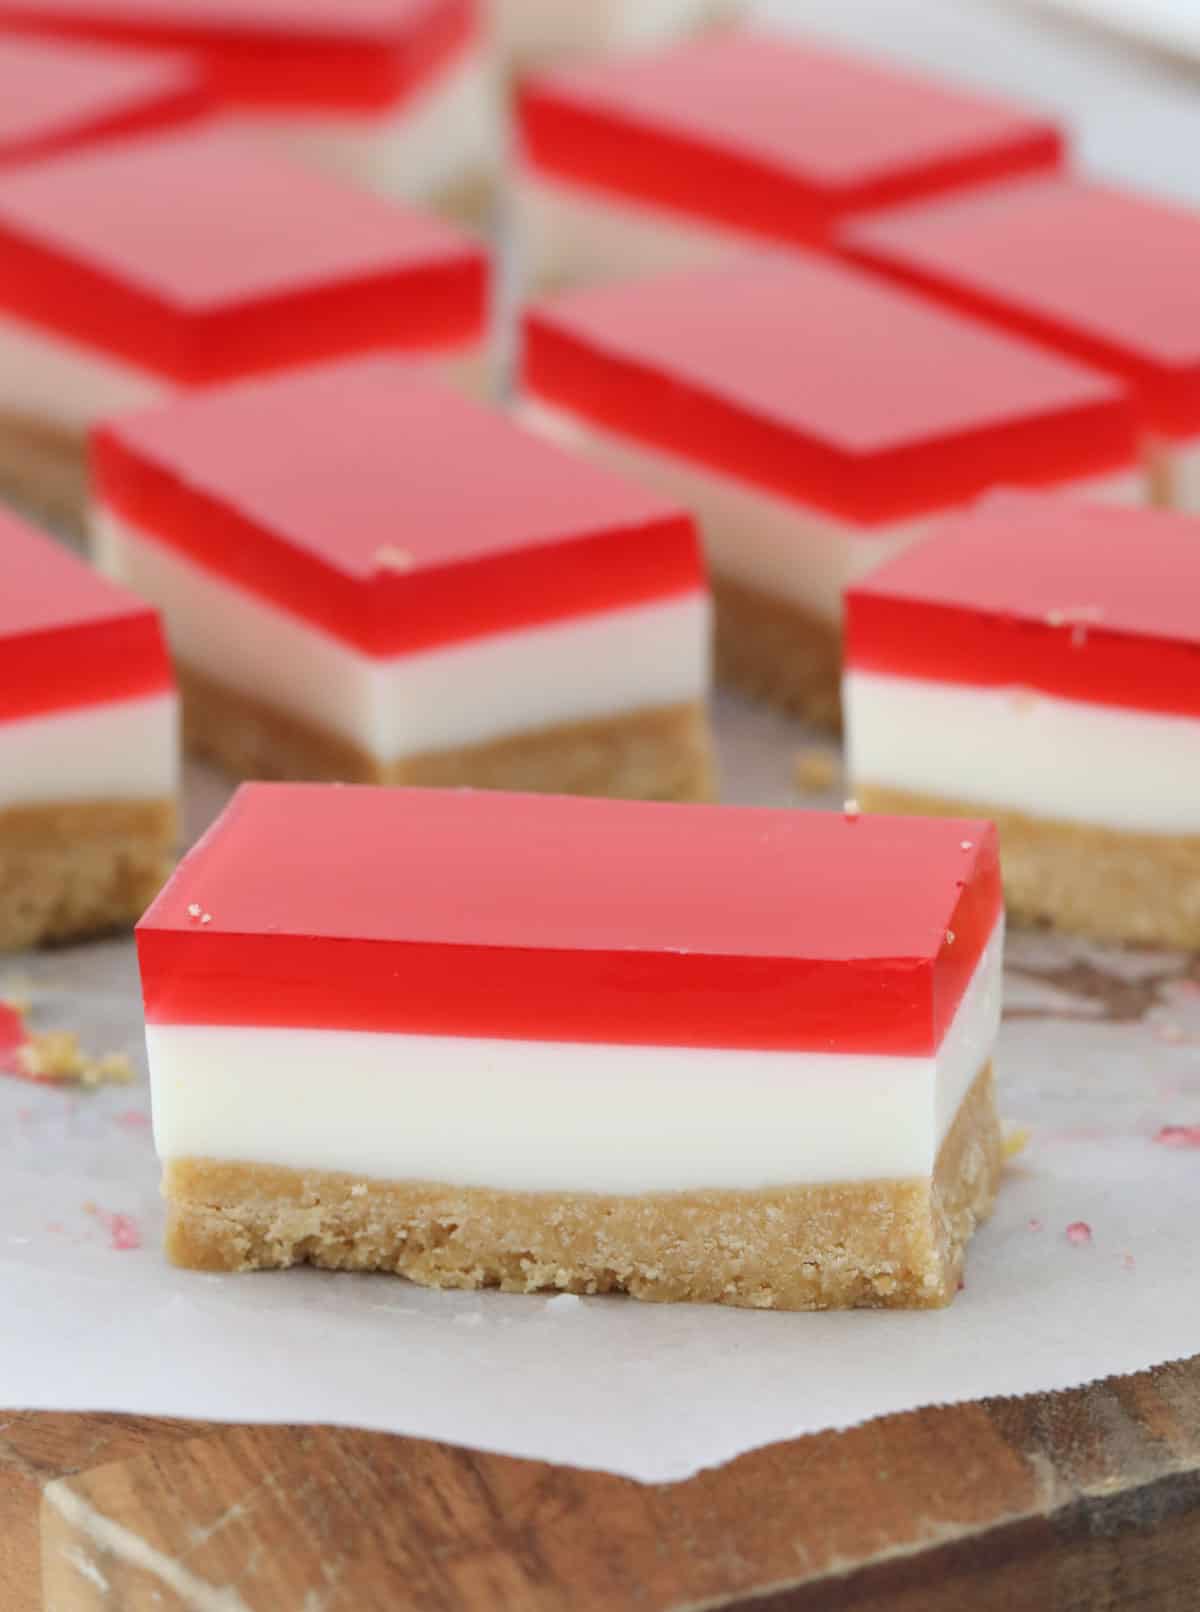 Pieces of strawberry jelly slice on a chopping board.